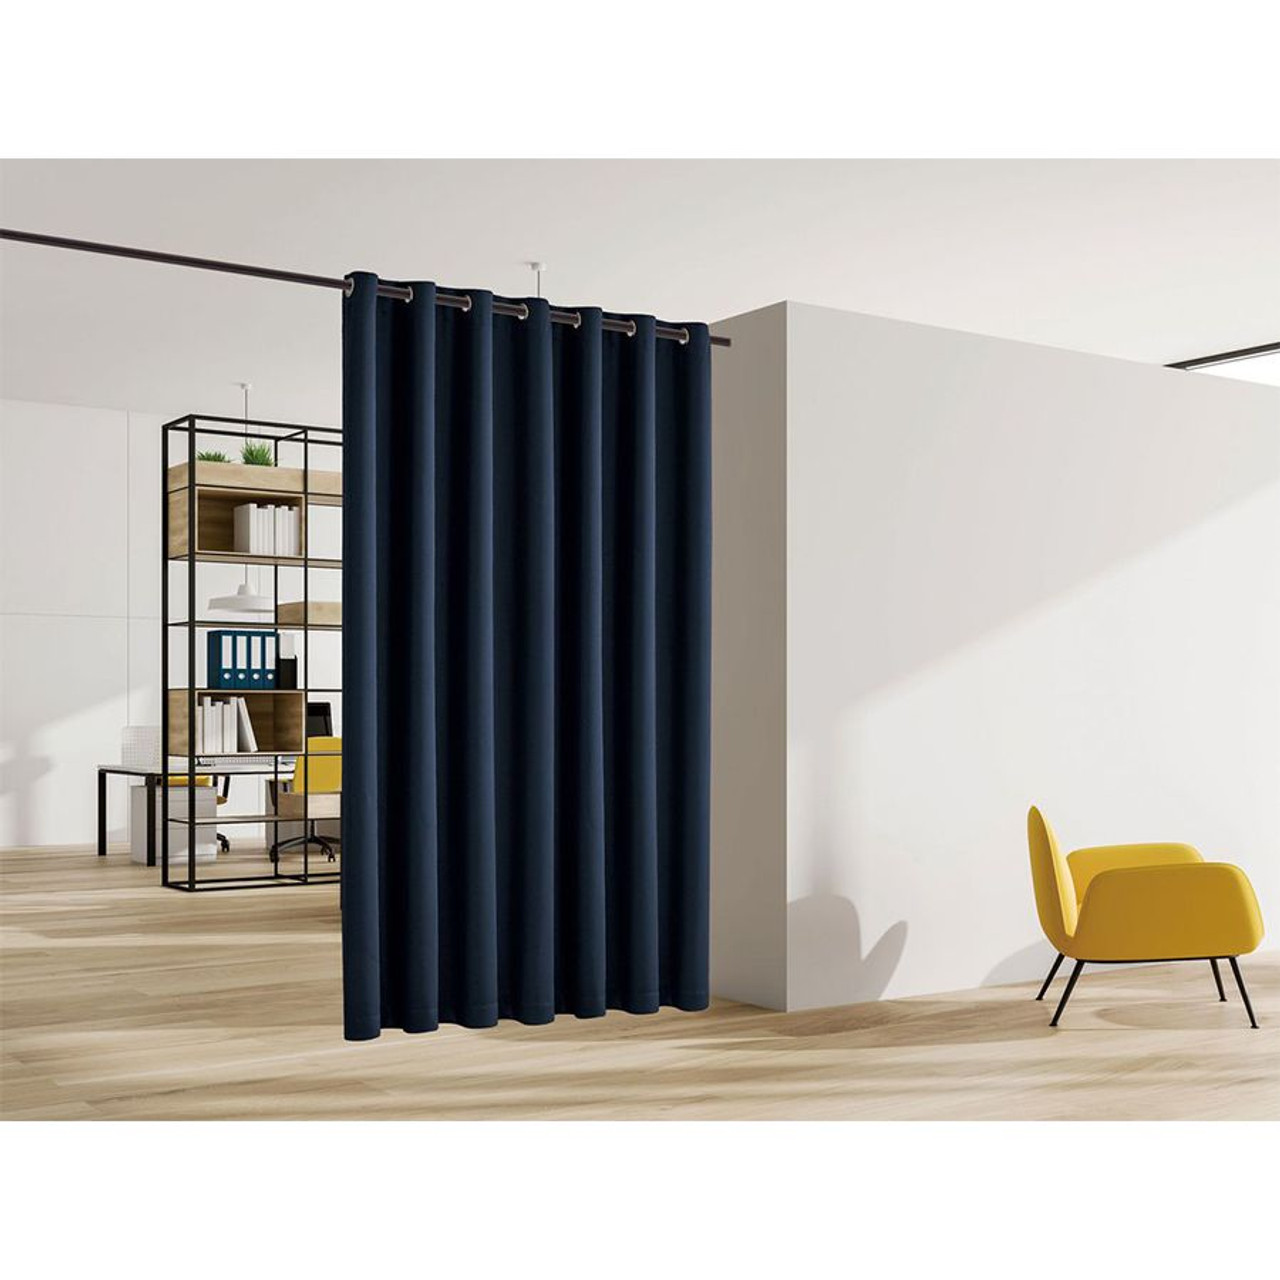  Blackout Room Divider Curtain Panel Thermal Insulated Navy Blue Color